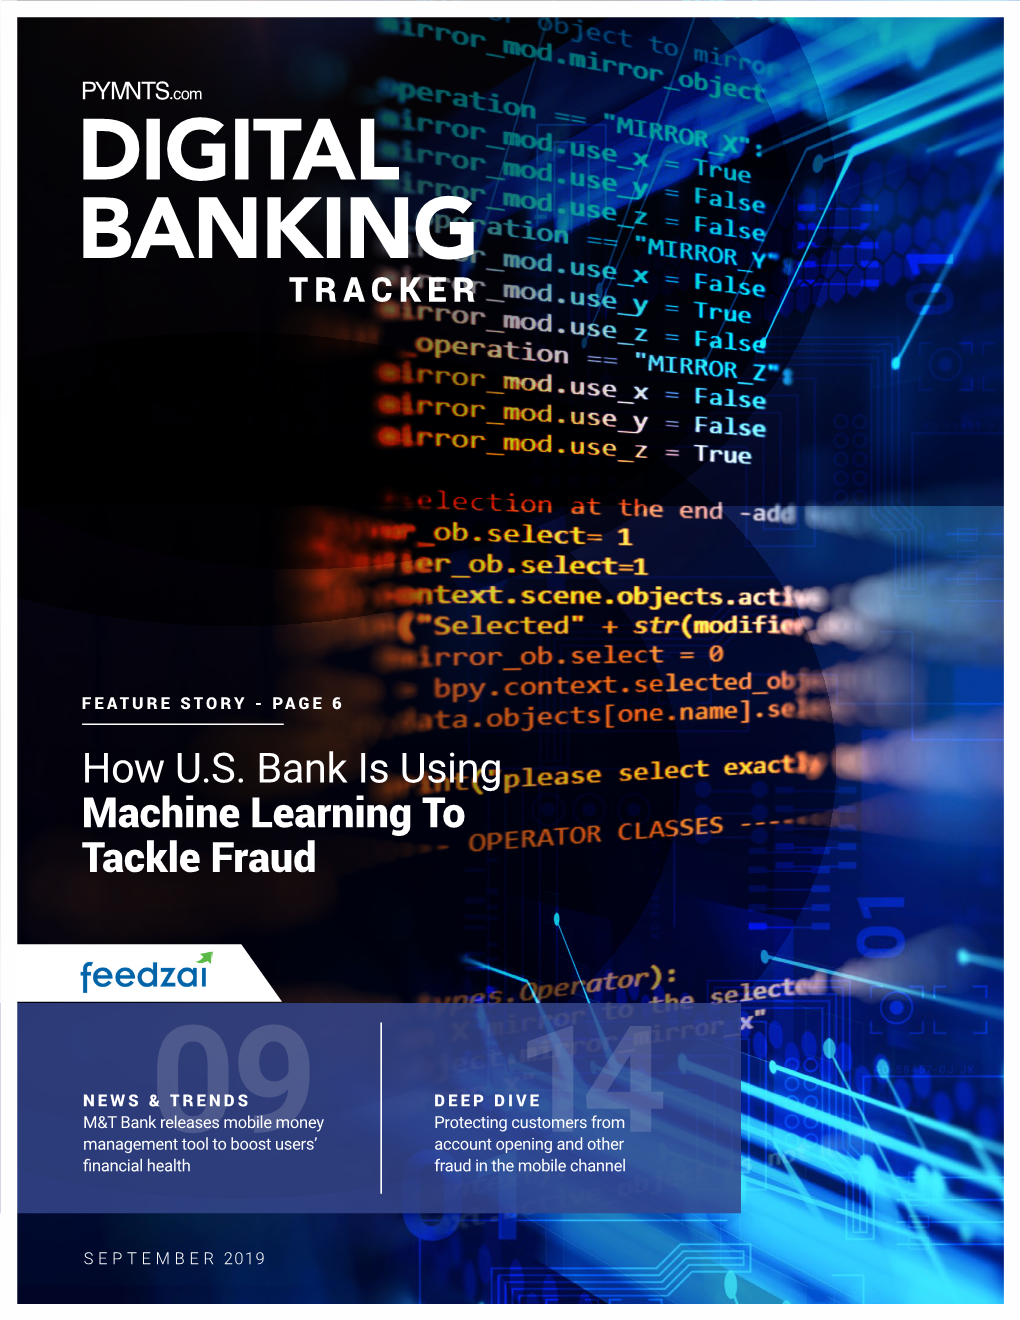 How U.S. Bank Is Using Machine Learning to Tackle Fraud